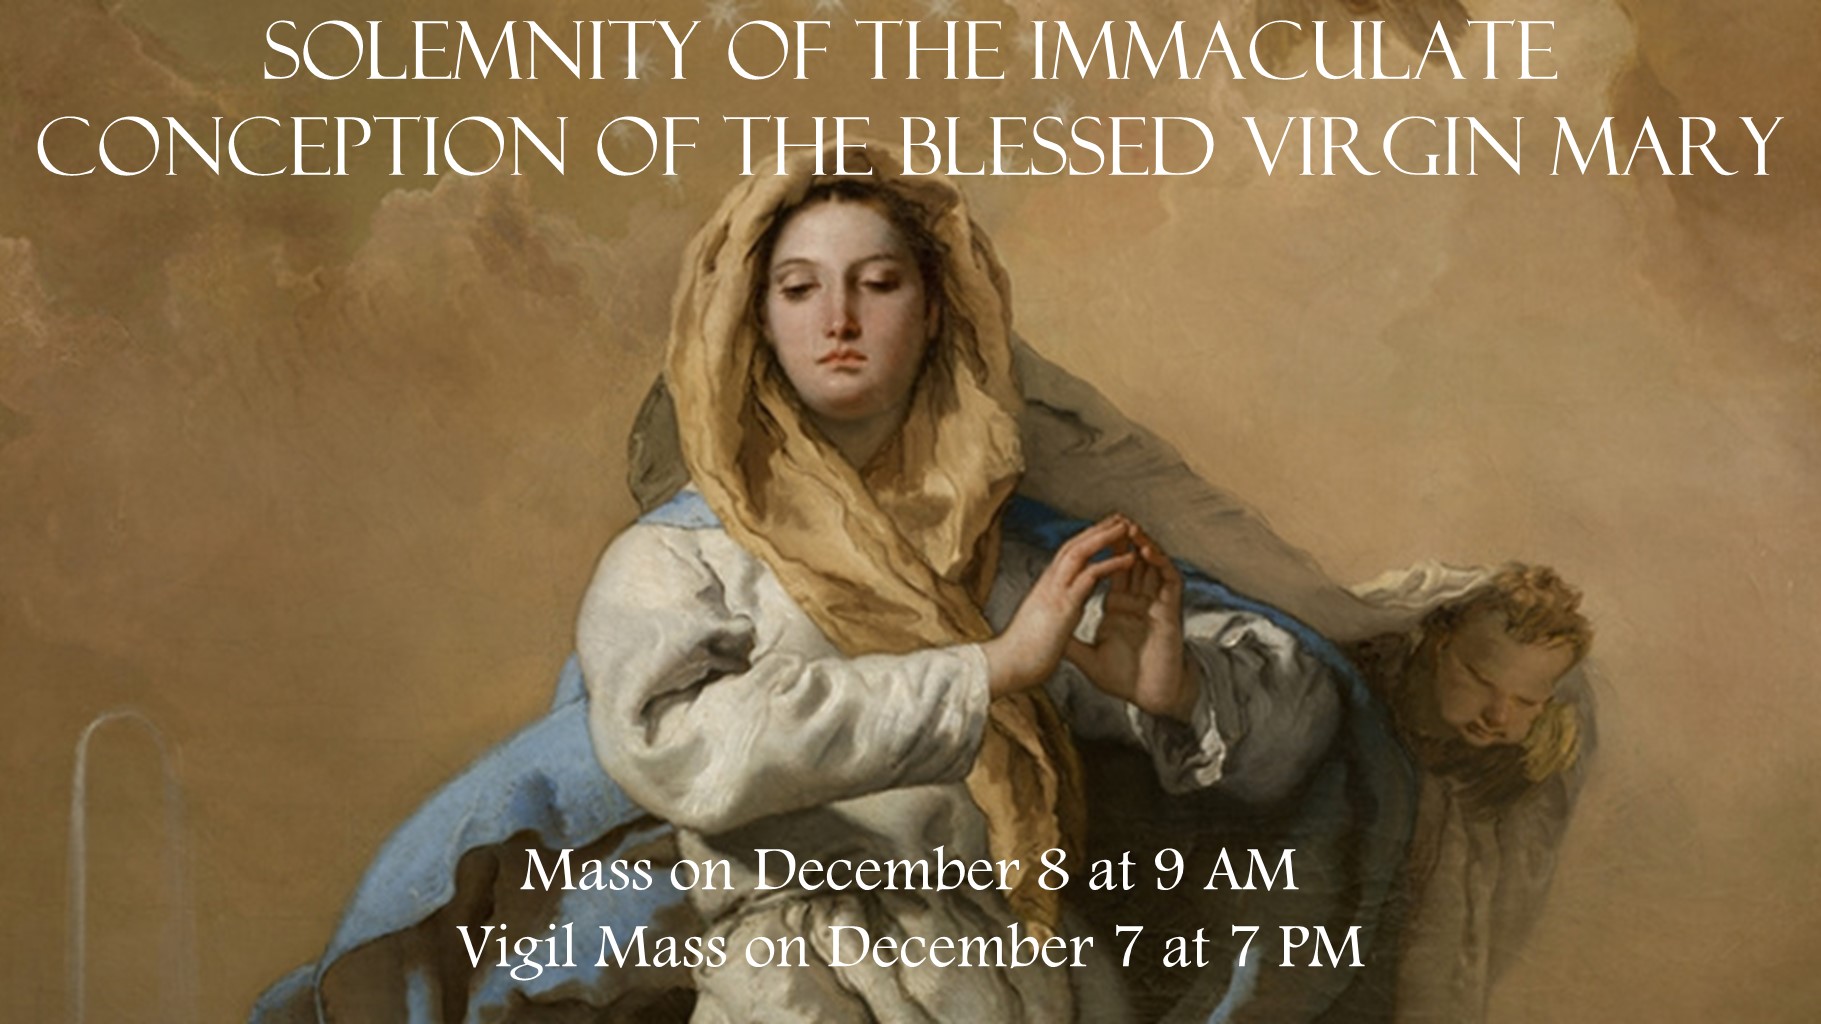 Immaculate COnception